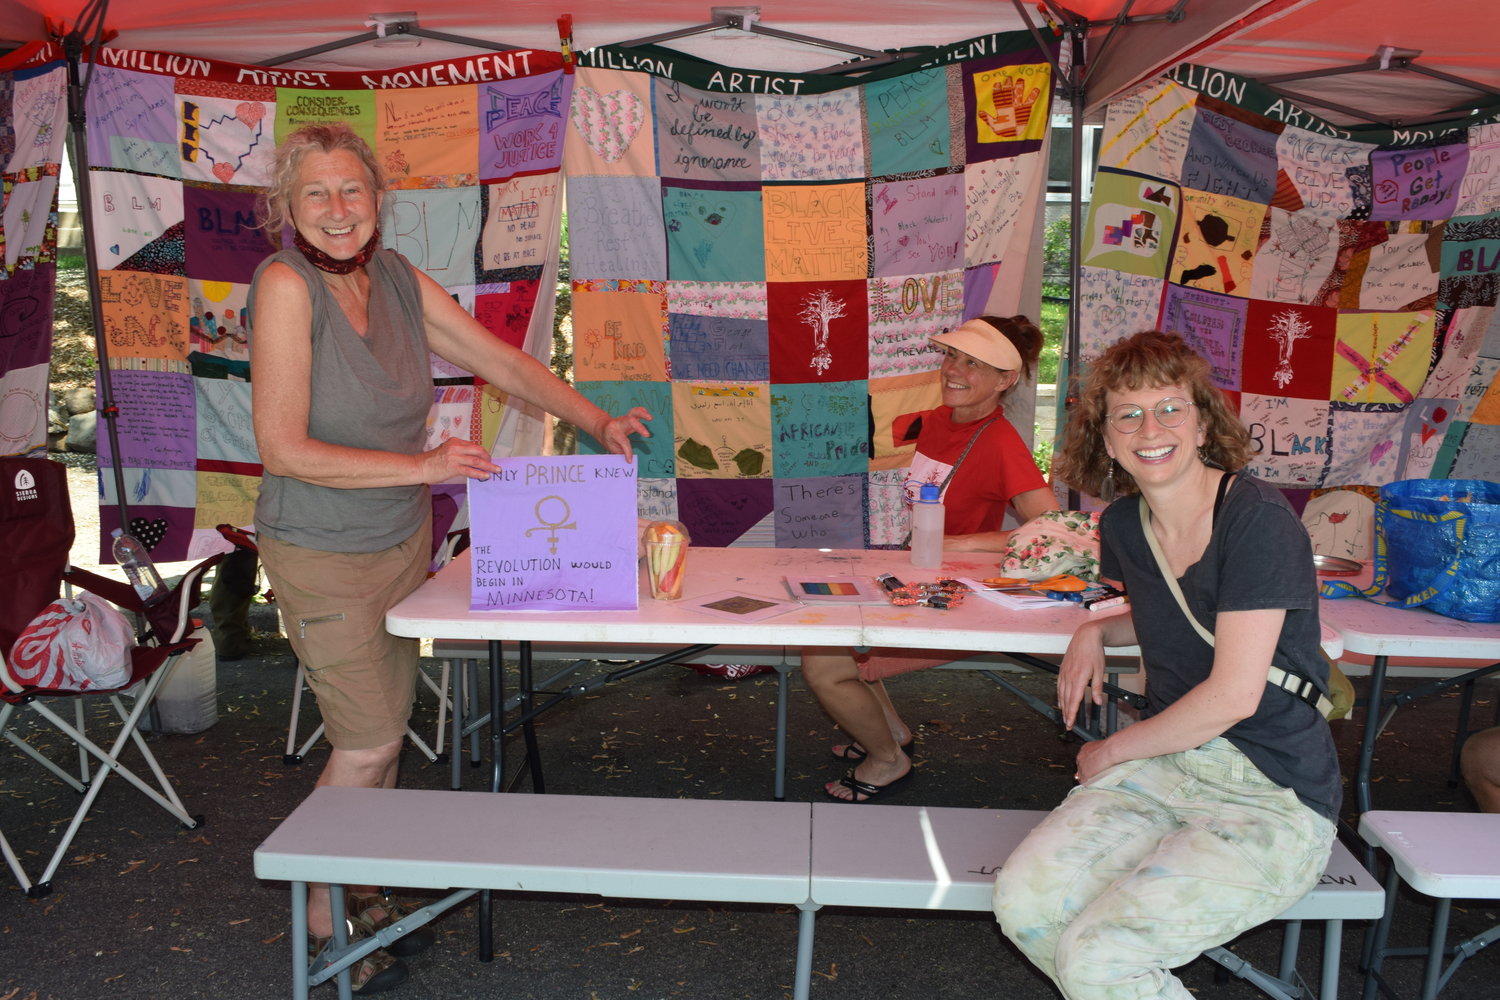 Beneath a canopy draped with quilt squares that were created during the uprising in May 2020, Sandy Spieler, Kelley Skumautz and Julia Snider Nickerson (from left to right) offer materials for people to make a square of their own as part of the Million Artist Movement.